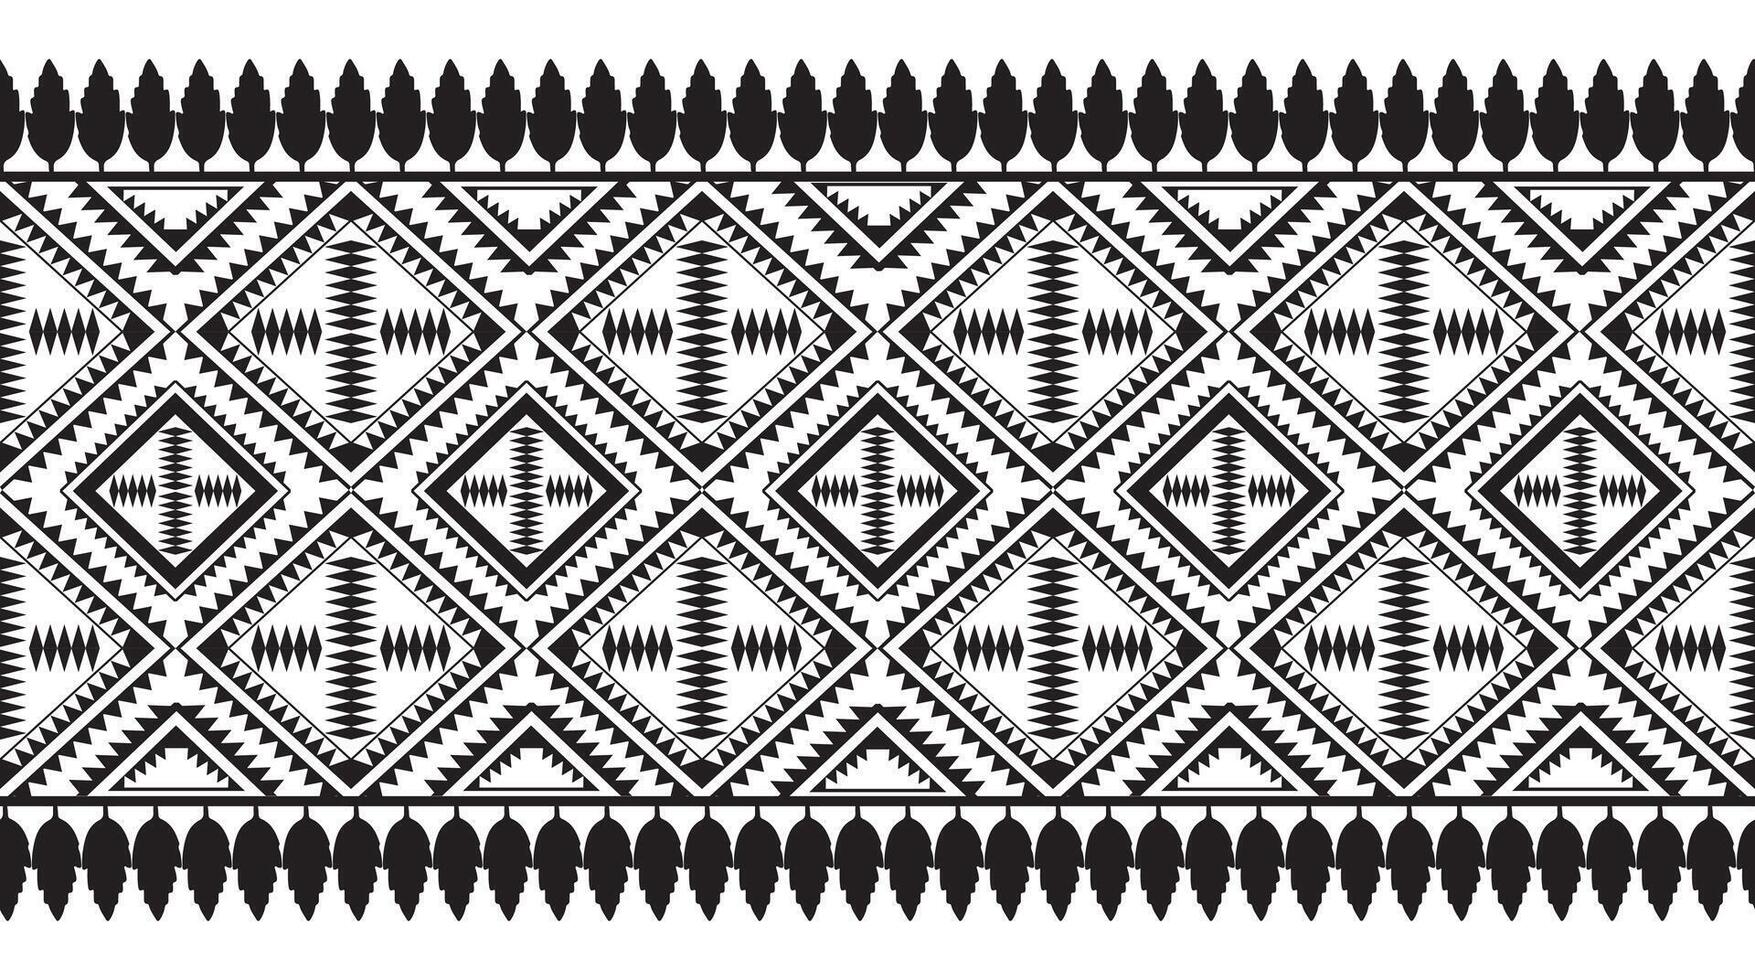 Tribal traditional fabric batik ethnic. ikat seamless pattern geometric repeating. Embroidery, wallpaper, wrapping, fashion, carpet, clothing. Black and white vector